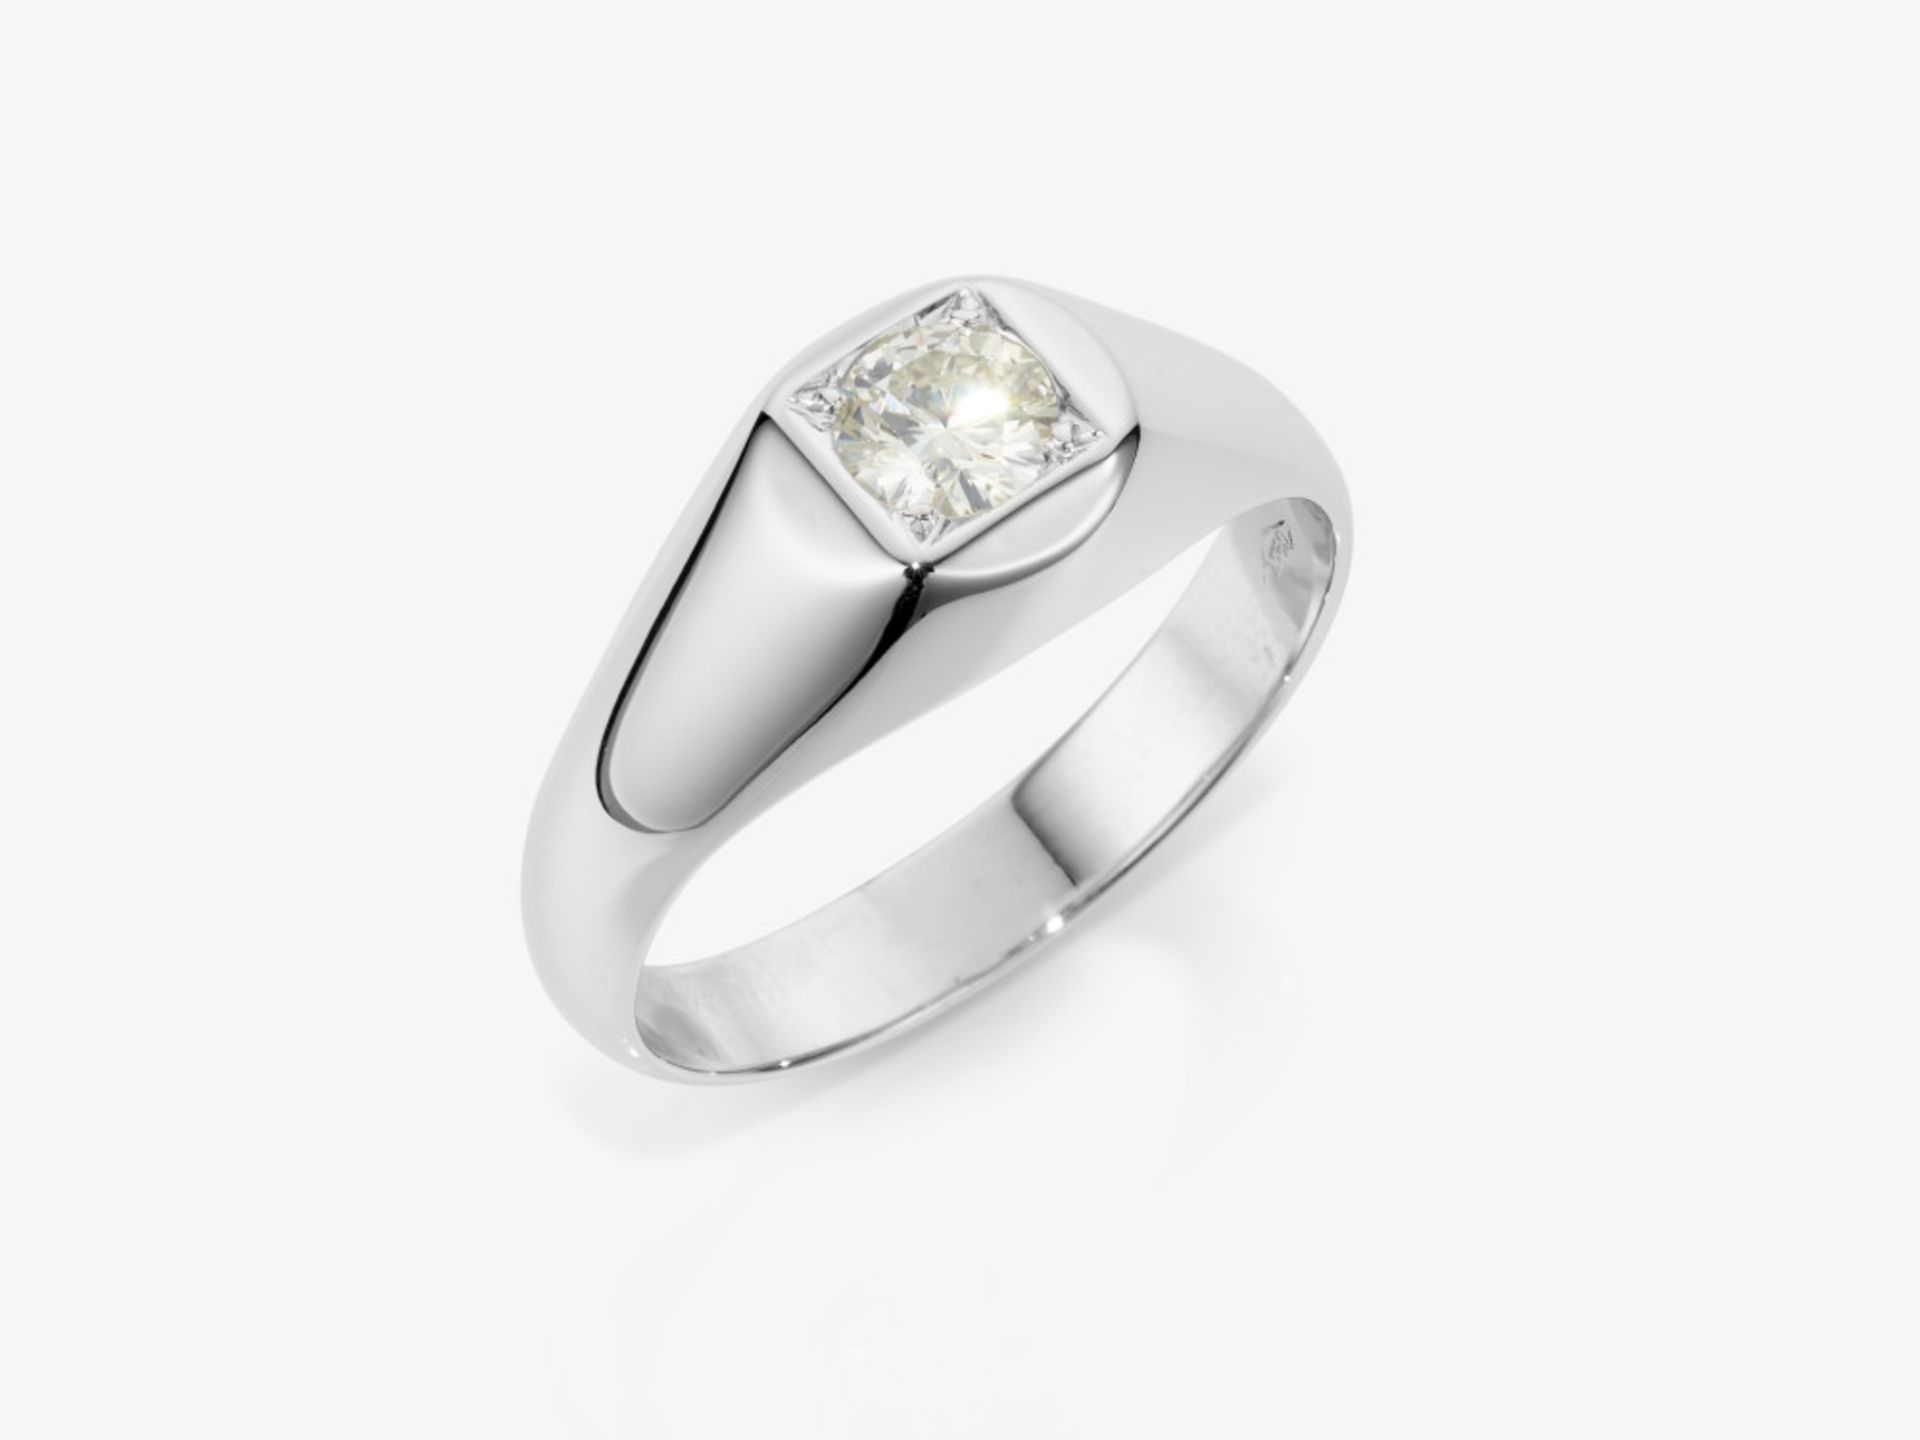 A gentleman's diamond solitaire ring - Image 2 of 4